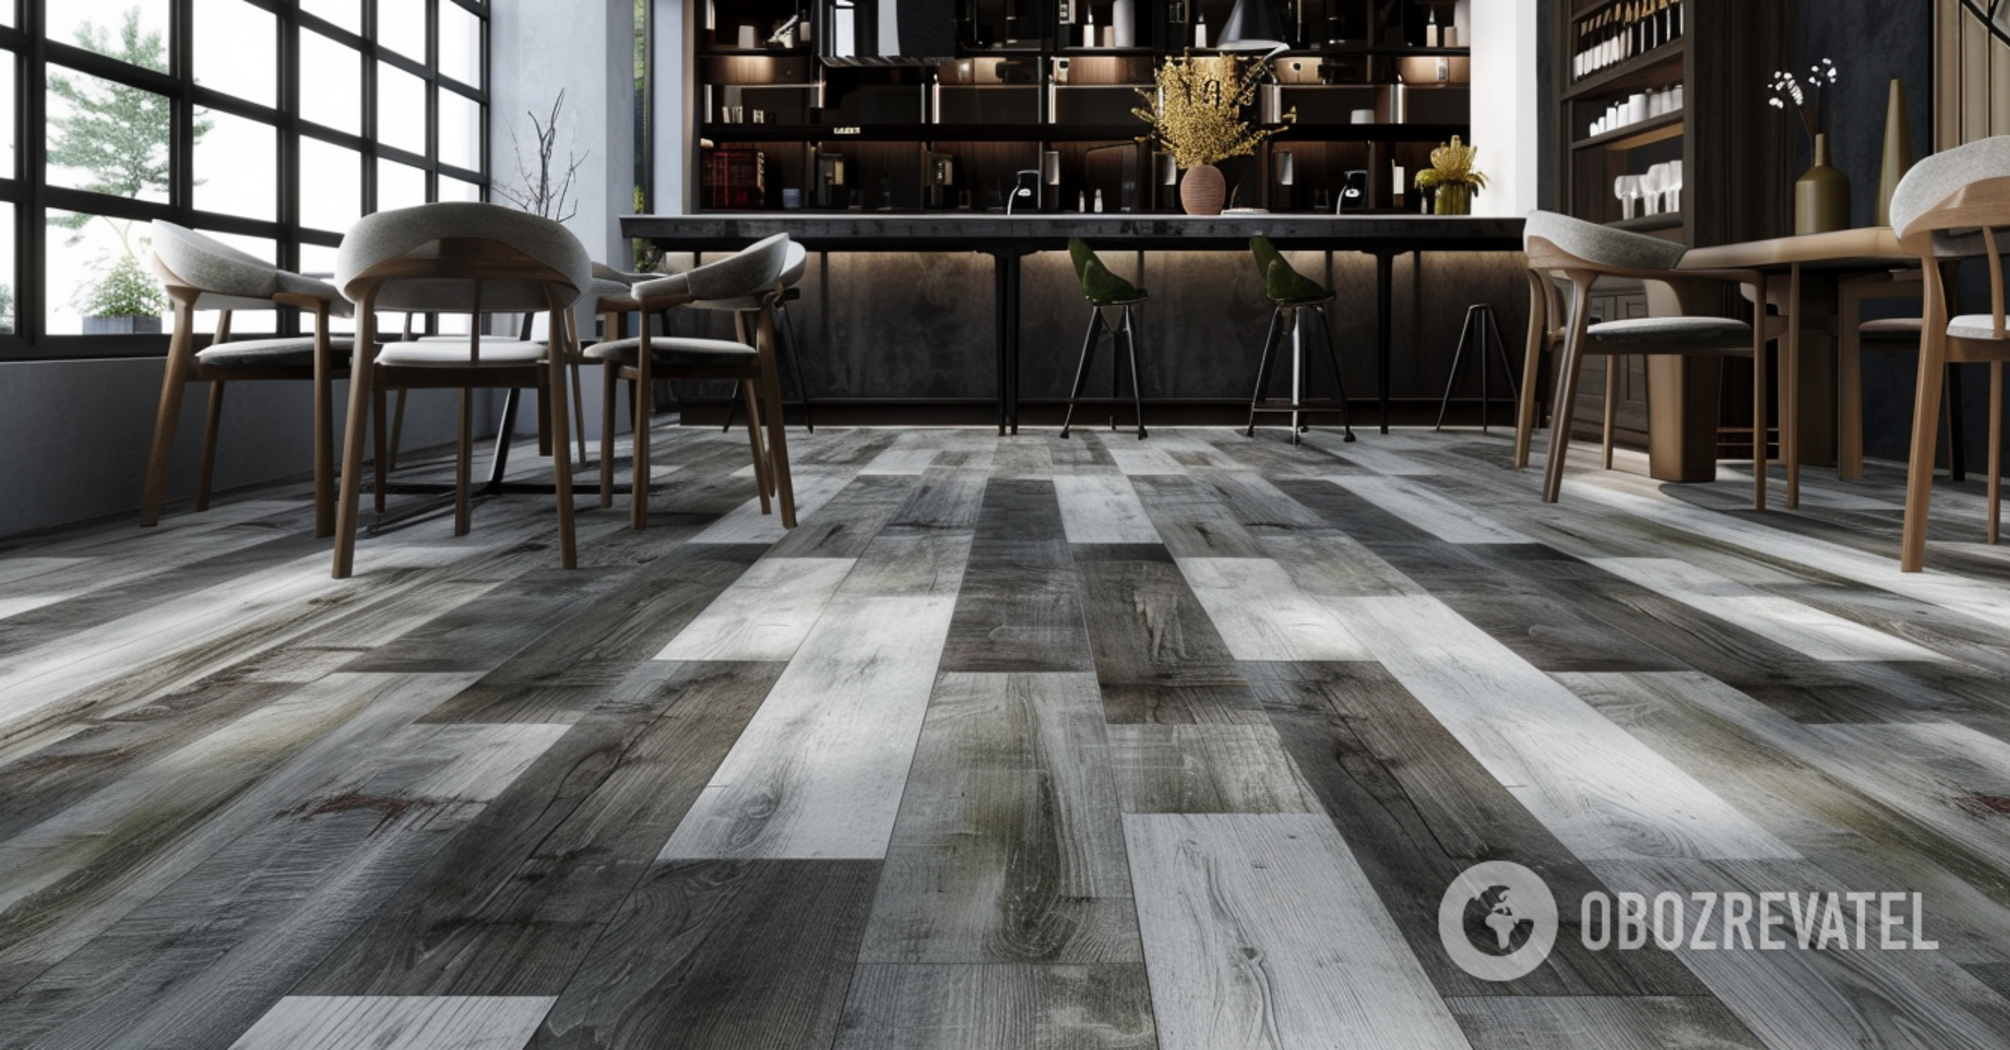 How to shine a vinyl floor: you only need one product